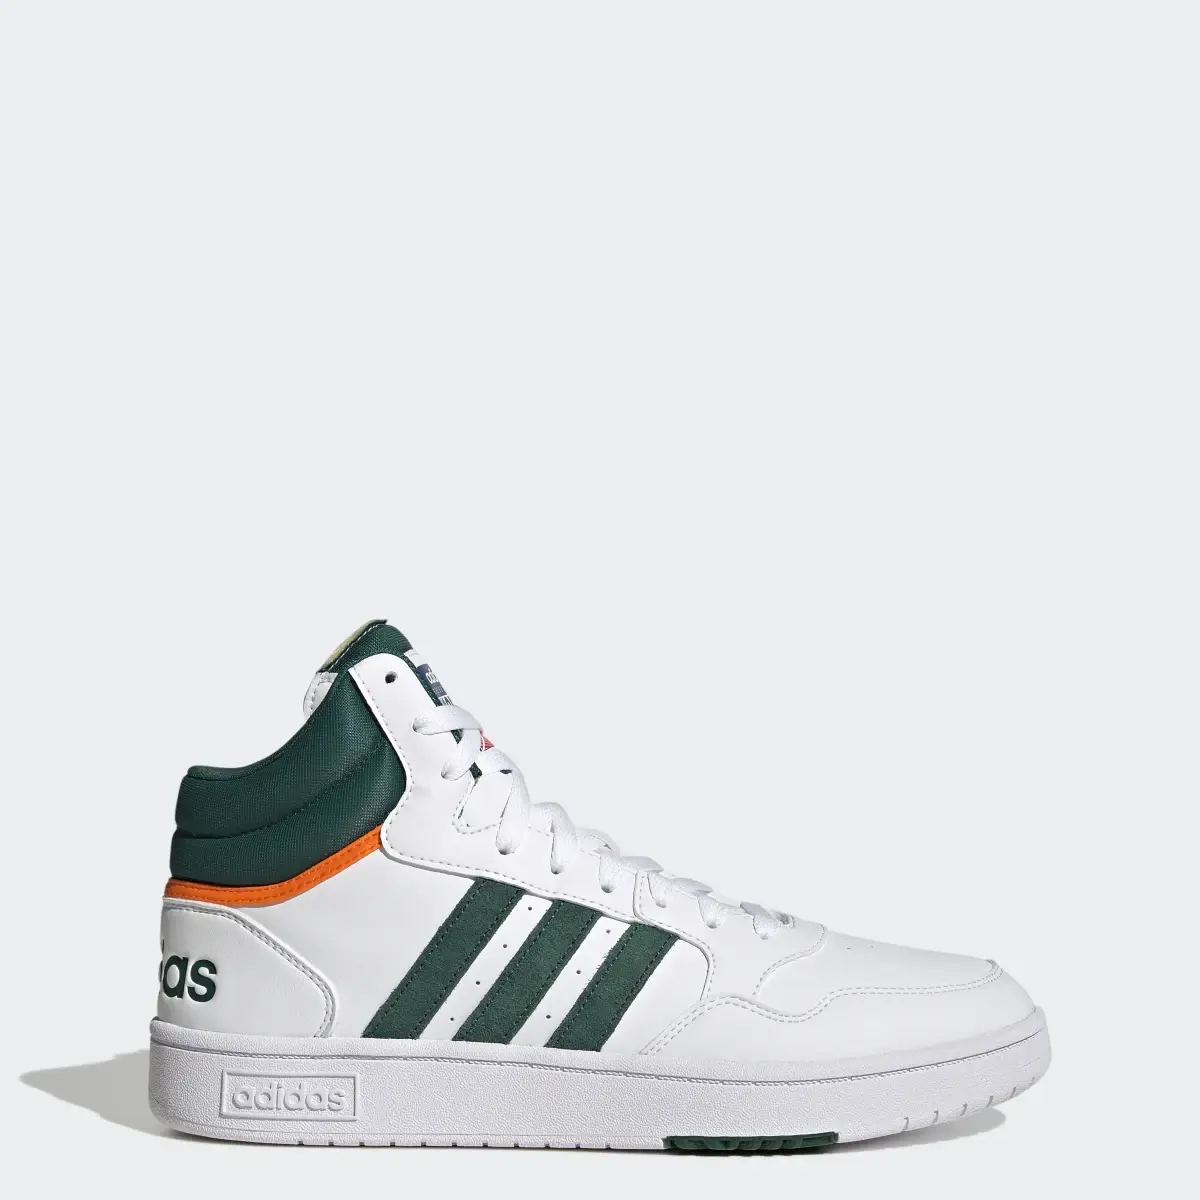 Adidas Hoops 3.0 Mid Classic Vintage Shoes. 1